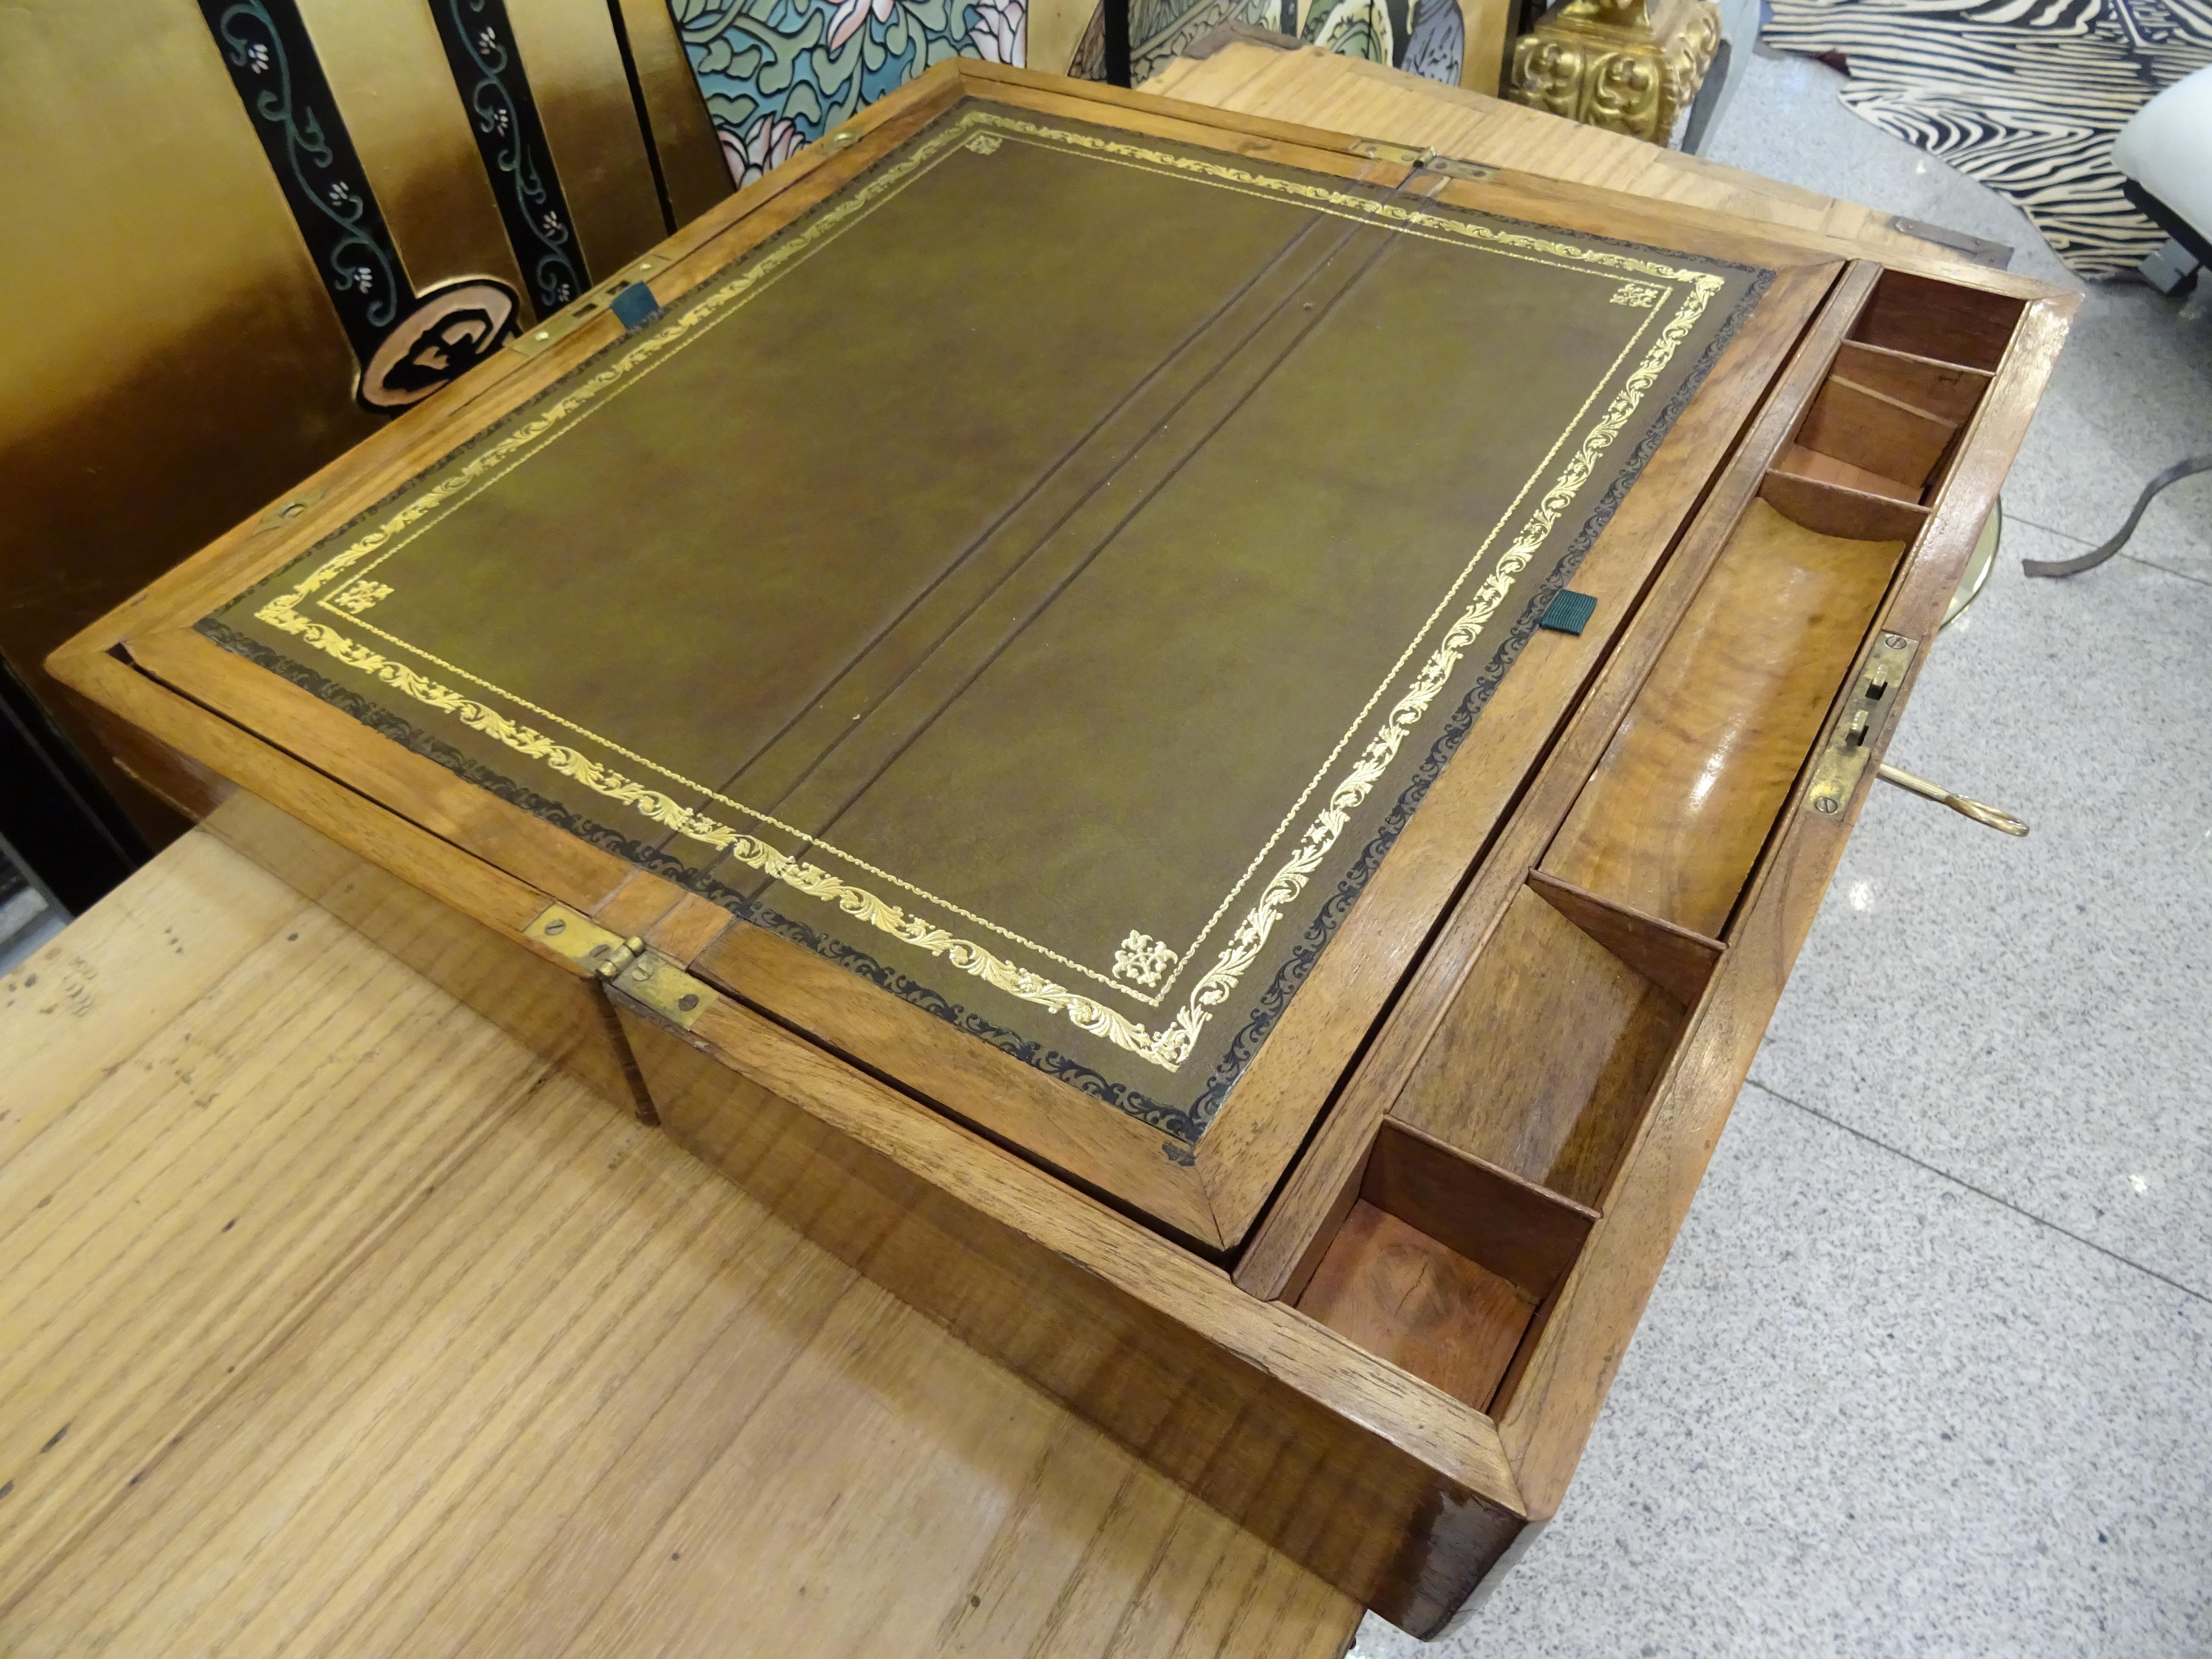 19th Century English Boat Desk-Box, Inlaid Wood and Mother of Pearl 12